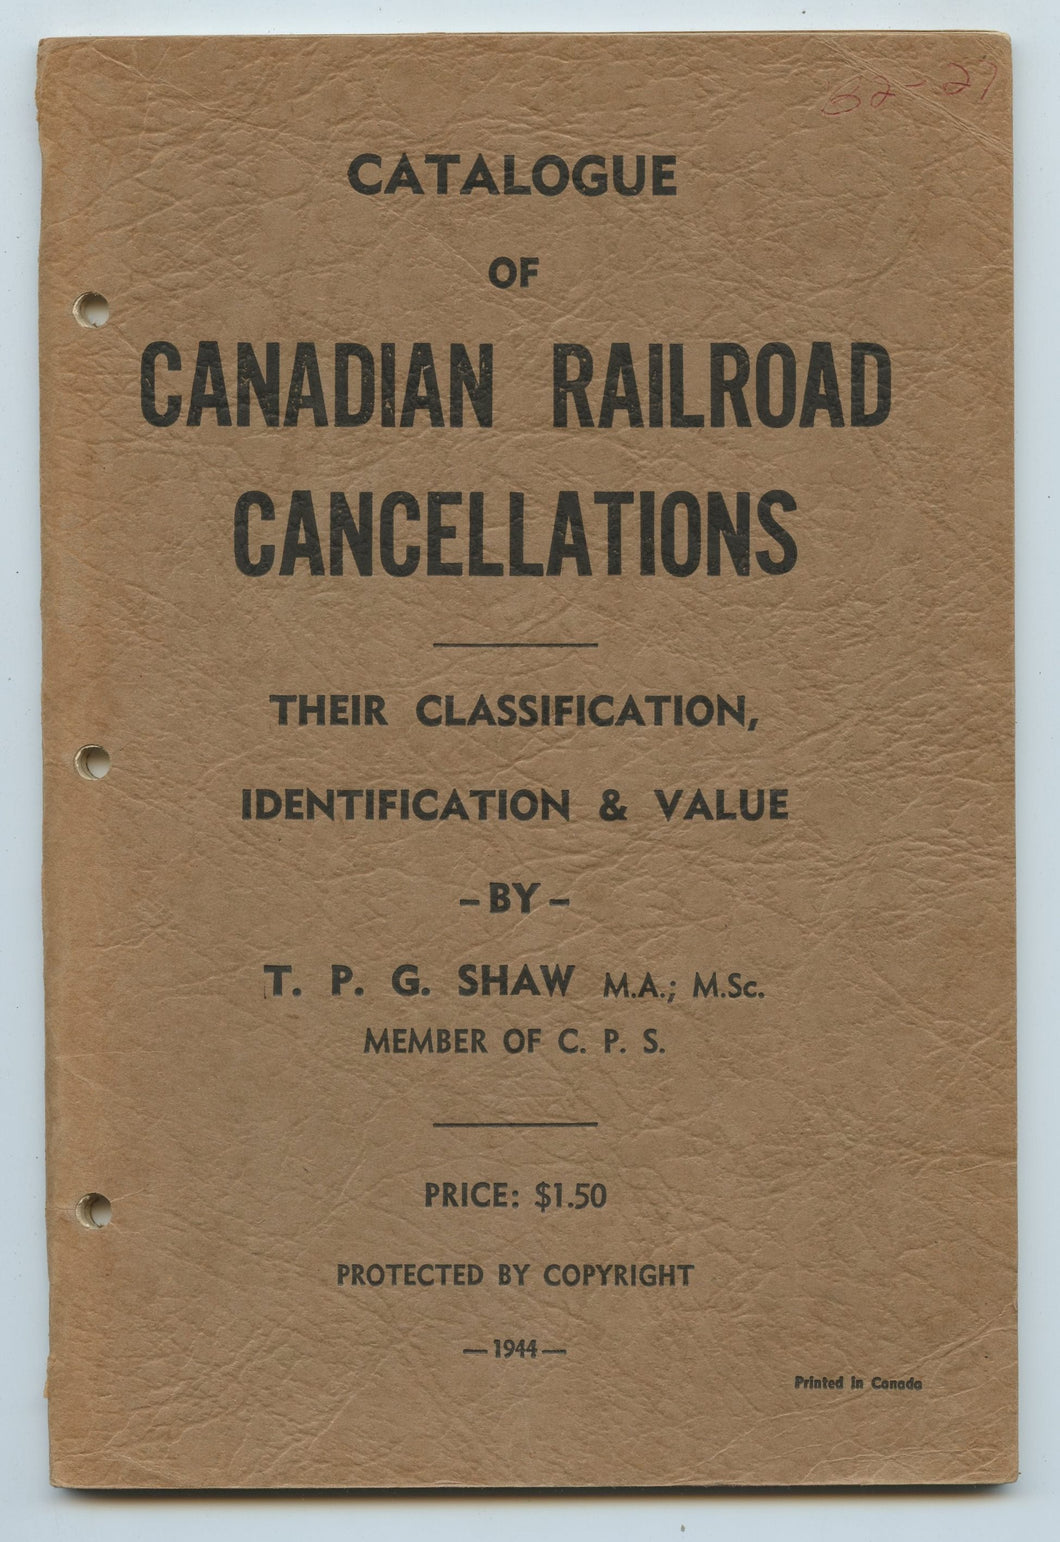 Catalogue of Canadian Railroad Cancellations: Their Classification, Identification & Value